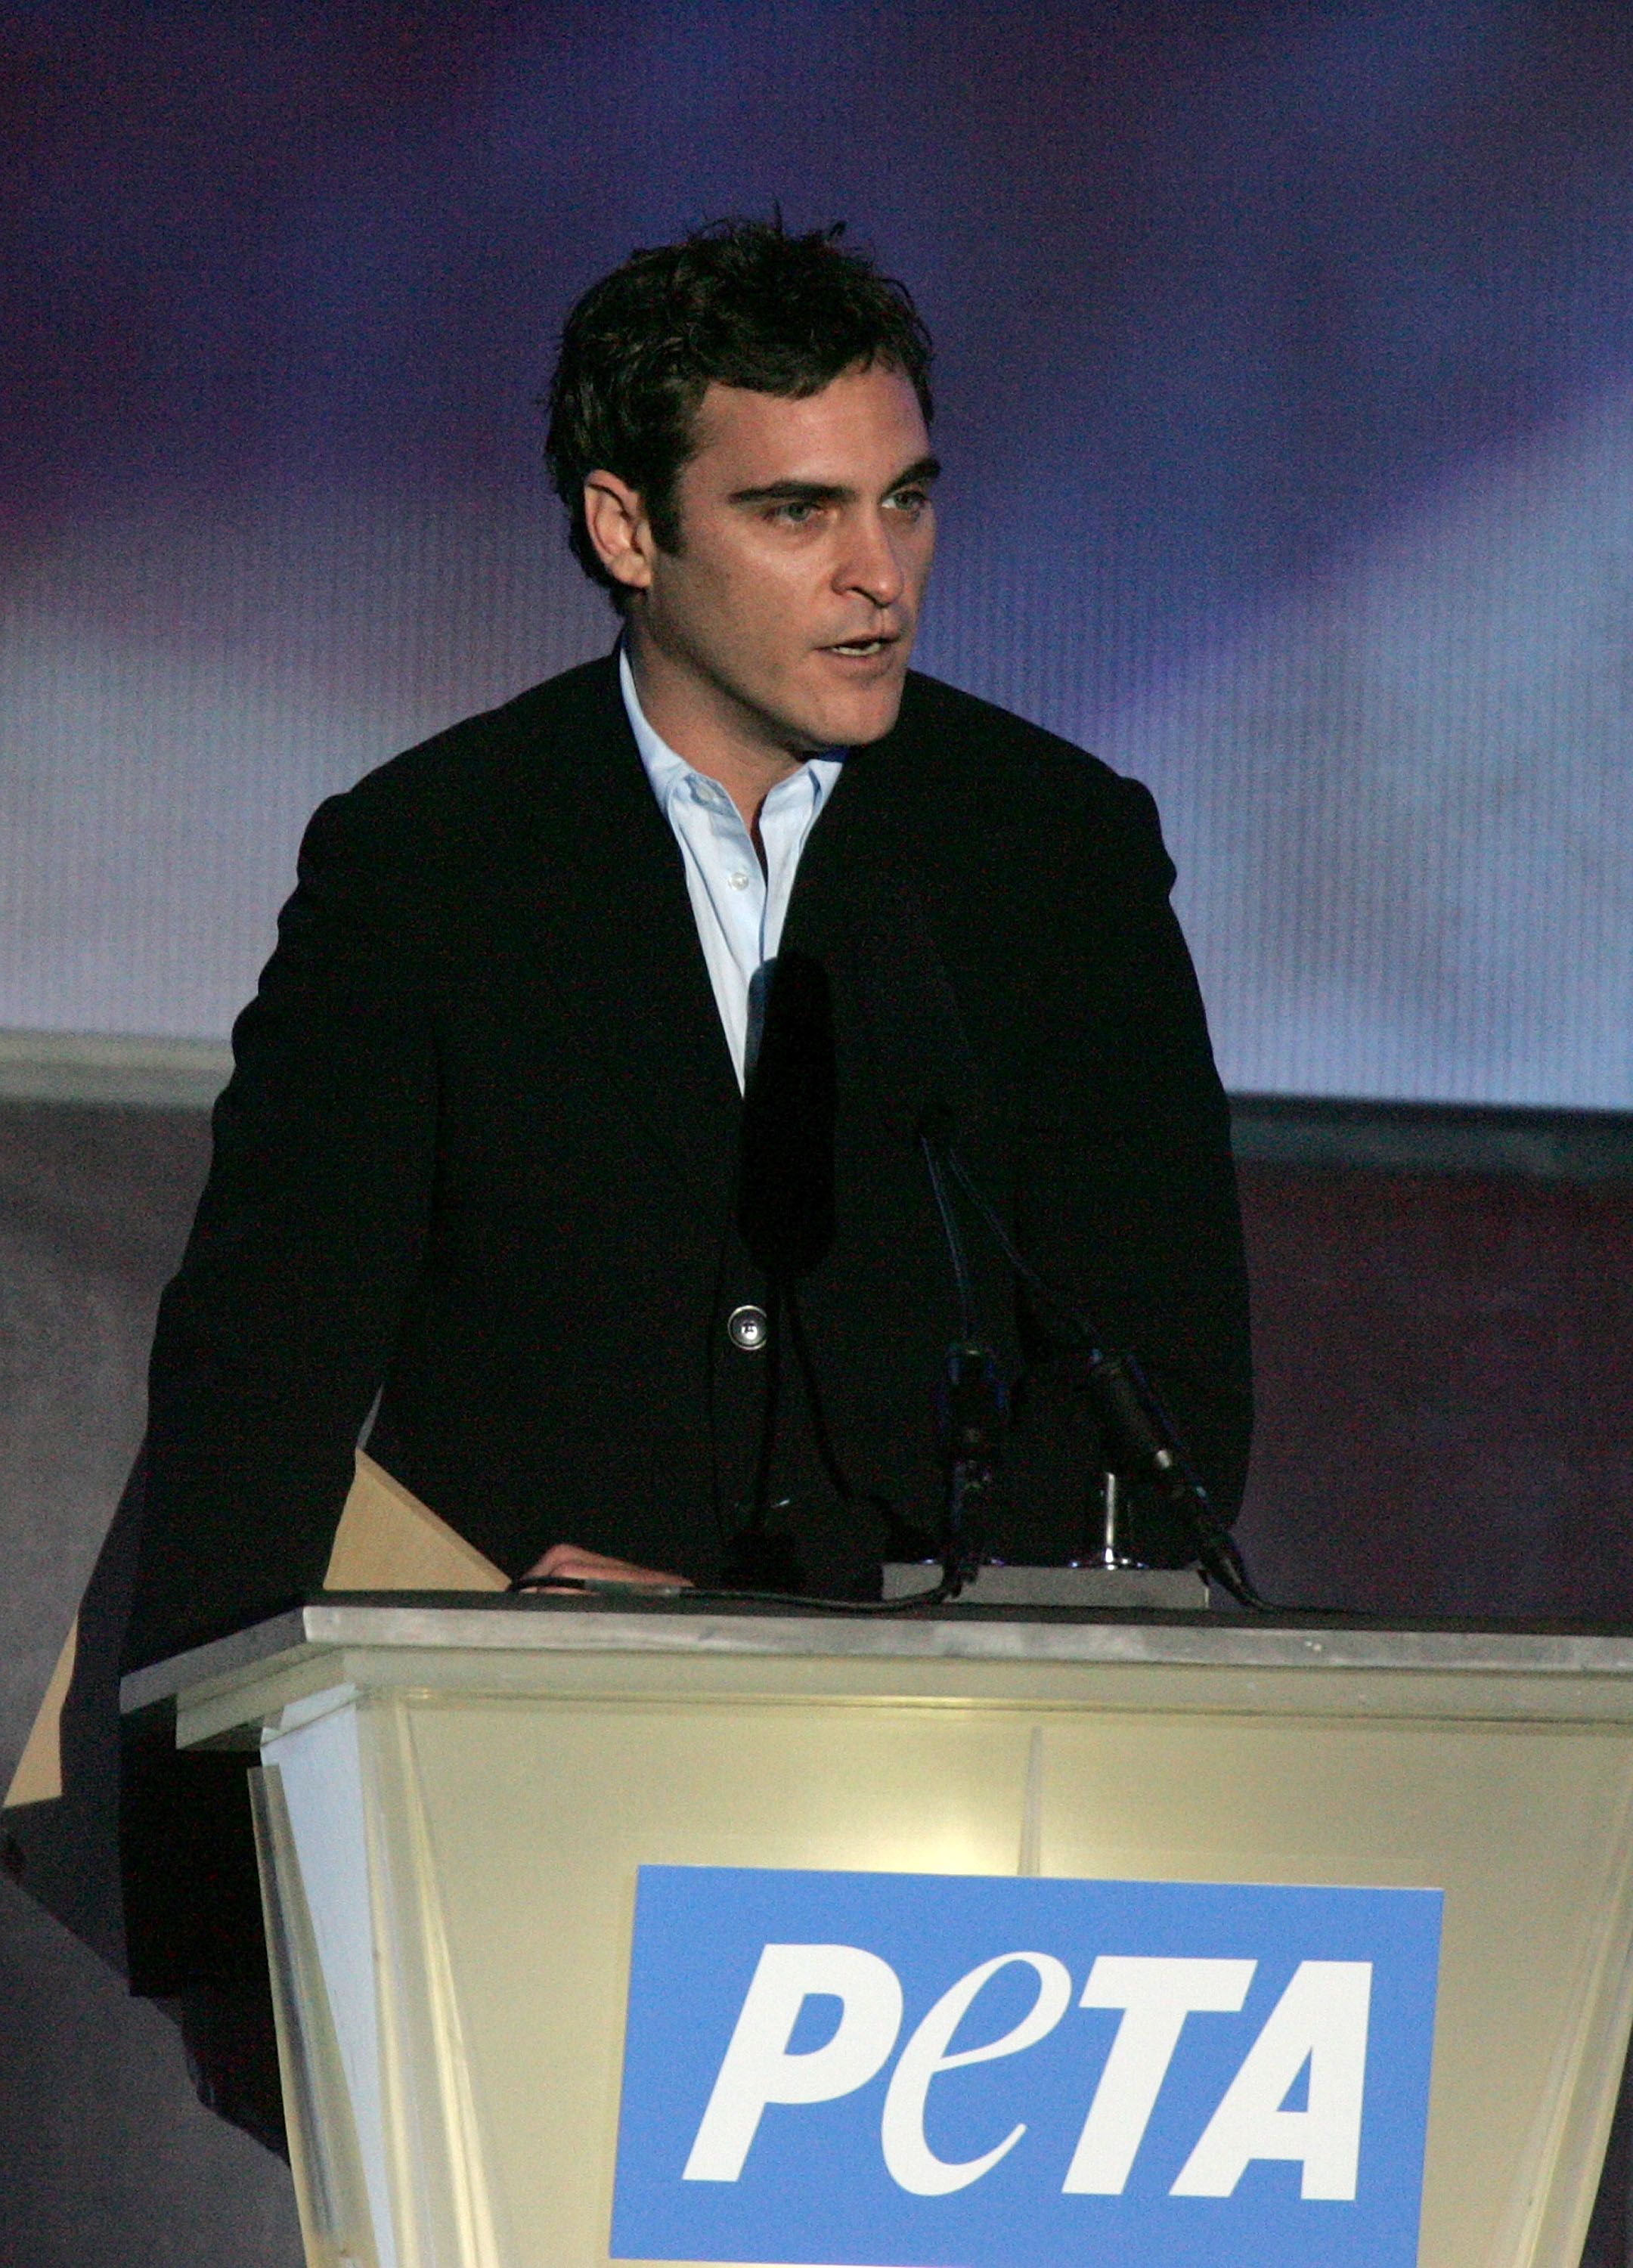 Joaquin Phoenix with the Humanitarian Award on behalf of Casey Affleck during PETA's 15th Anniversary Gala and Humanitarian Awards at Paramount Studios on September 10, 2005 in Hollywood, California. | Source: Getty Images